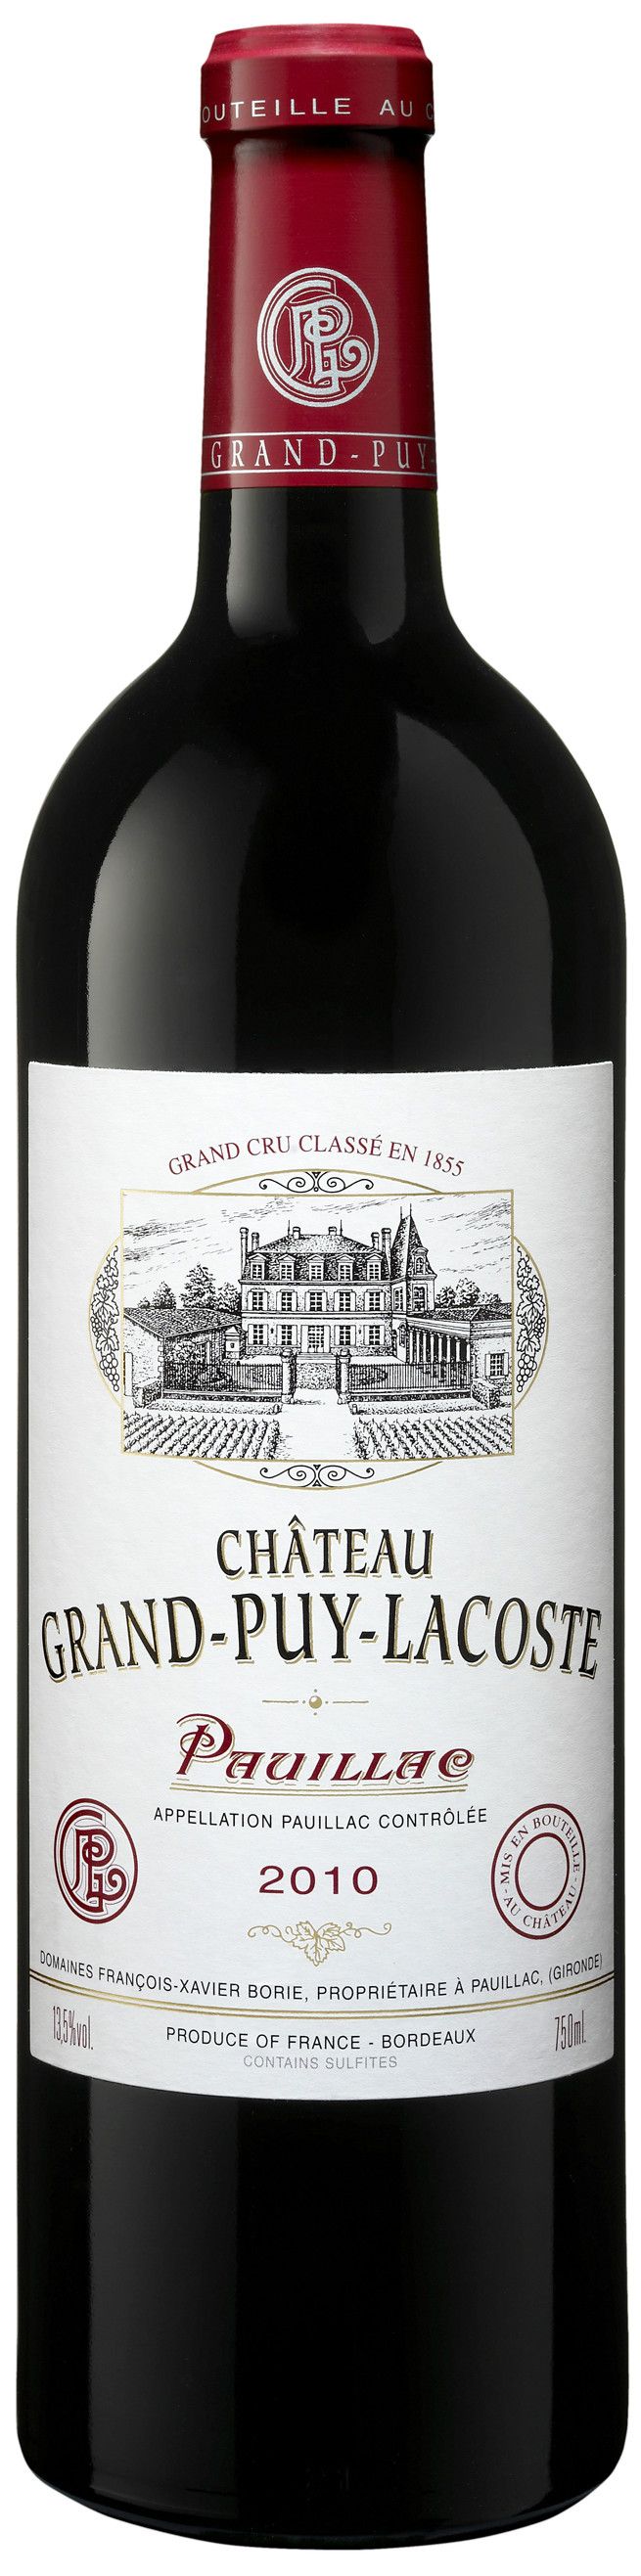 Chateau Grand-Puy-Lacoste, 2009